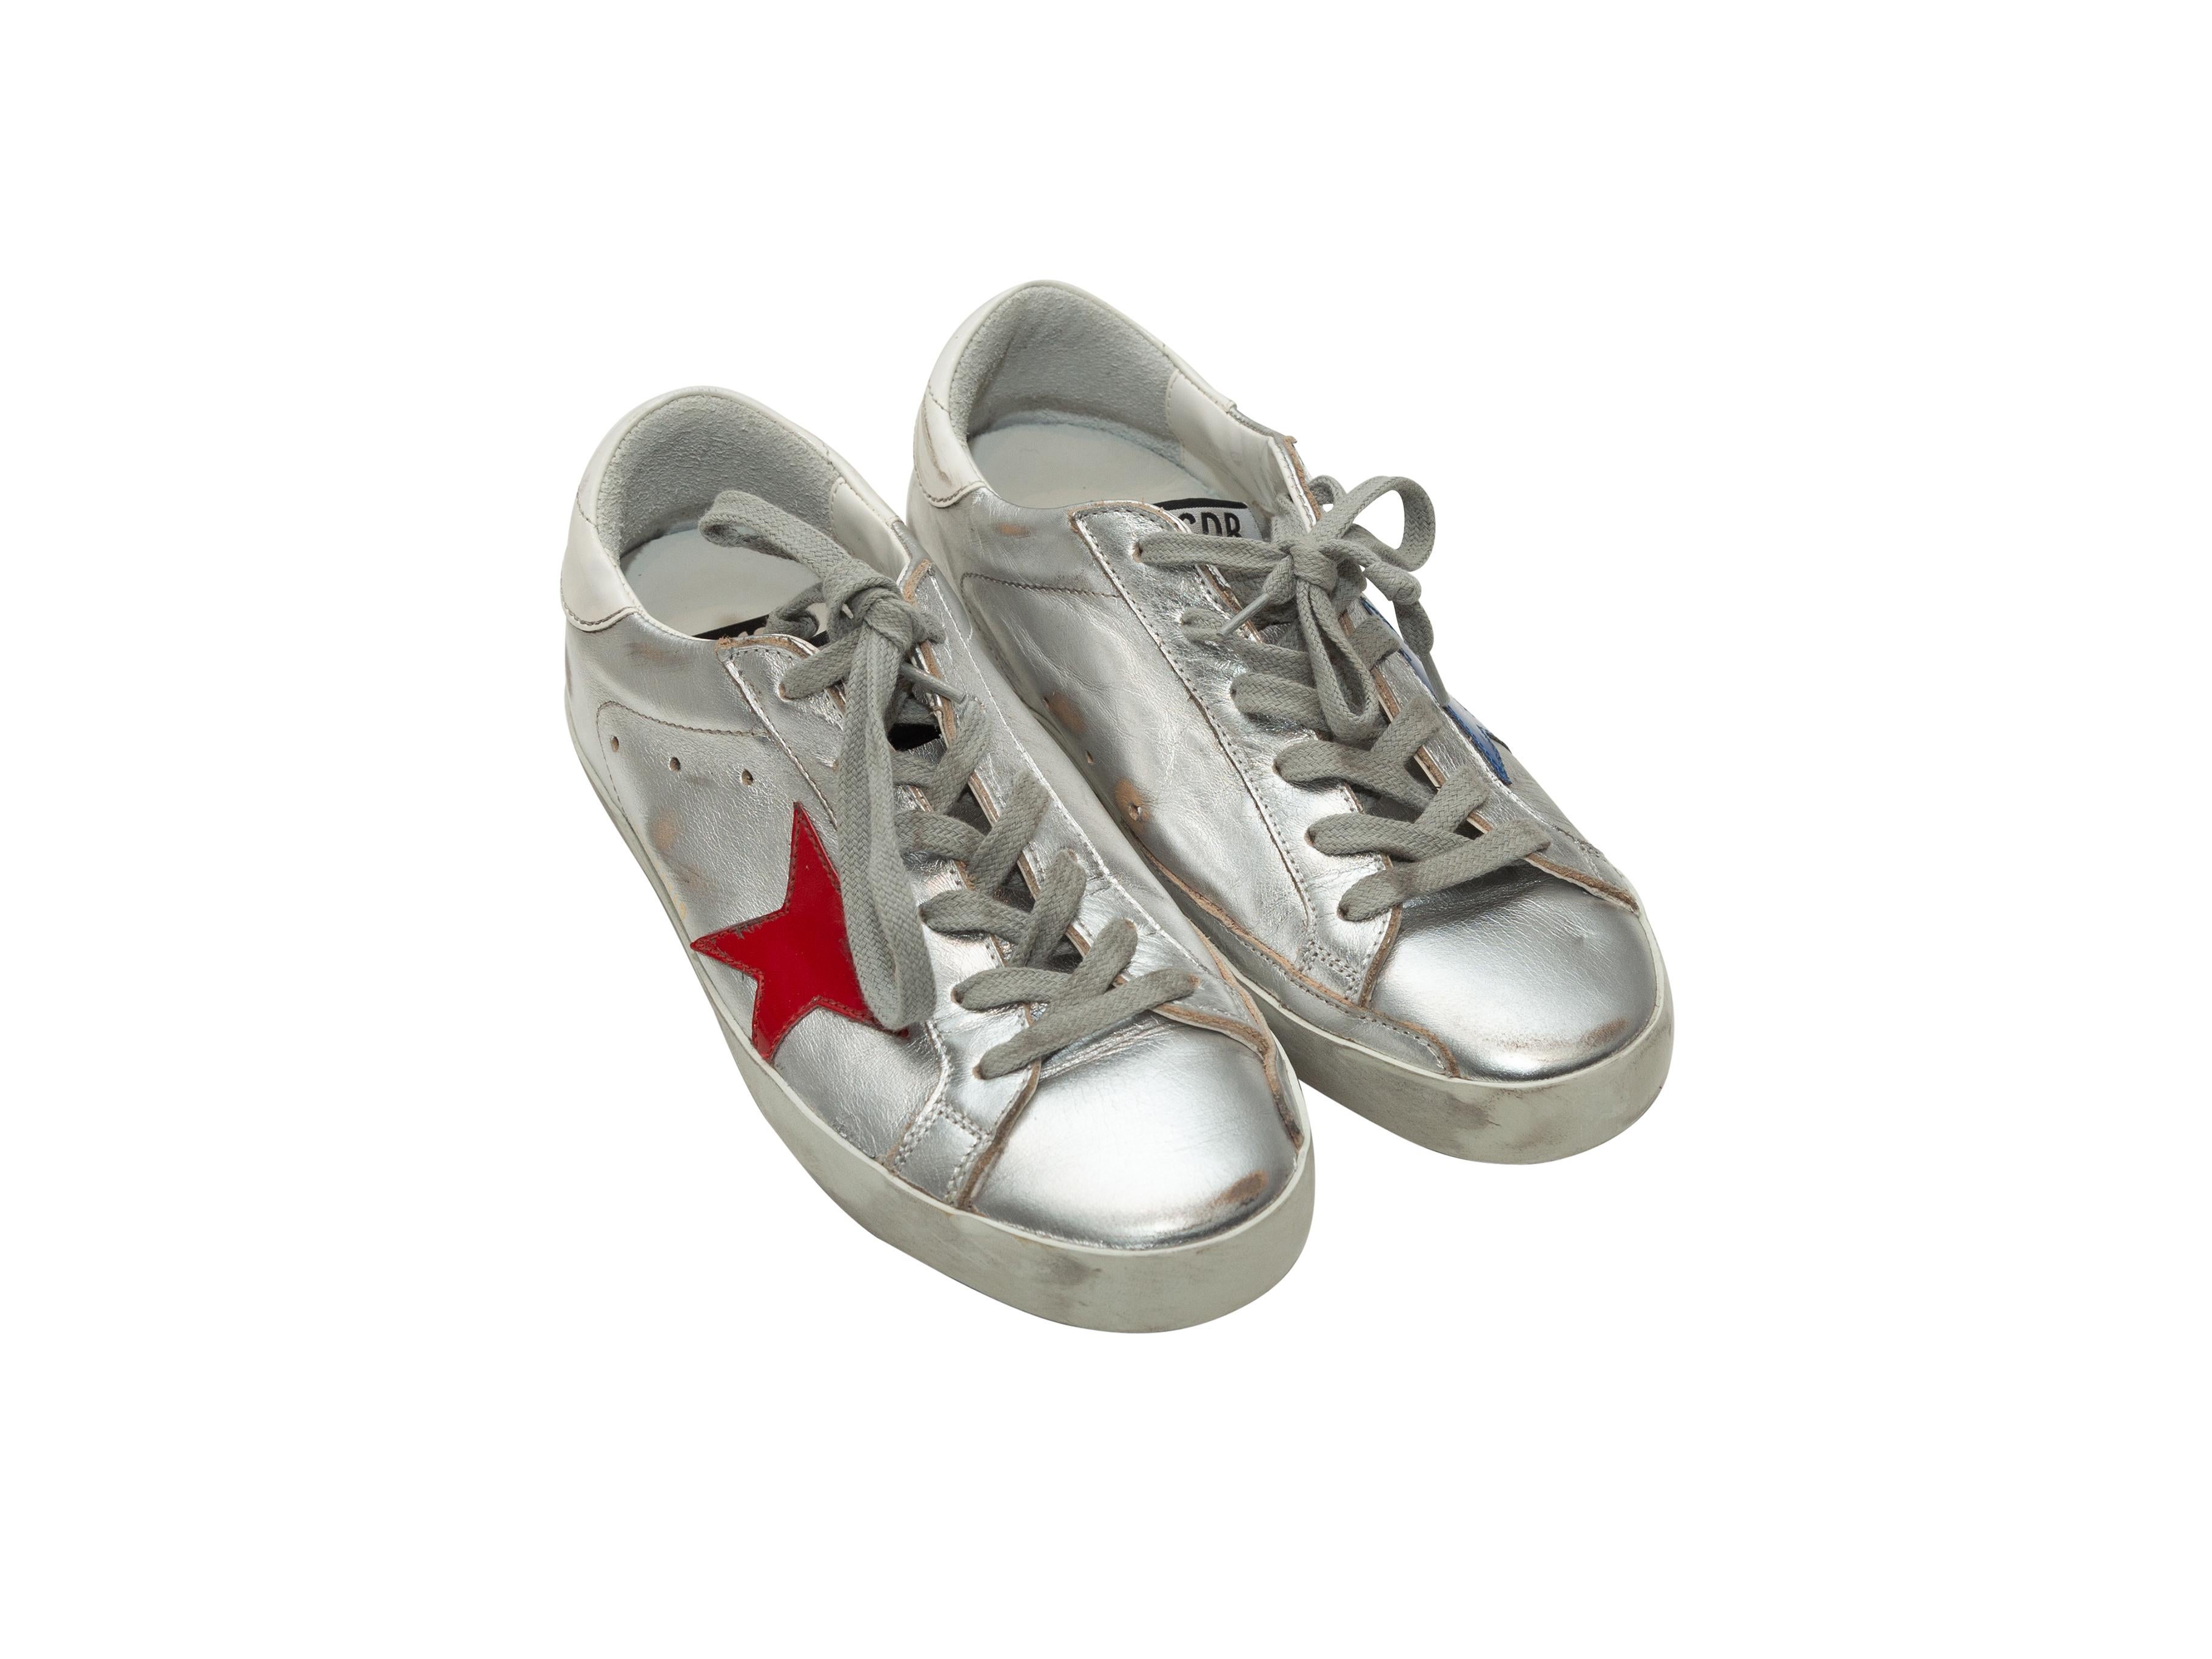 Product details: Silver, red, blue and white leather low-top distressed sneakers by Golden Goose Deluxe Brand. Lace-up tie closures at tops. Designer size 37.
Condition: Pre-owned. Very good. Slight creasing at toes.